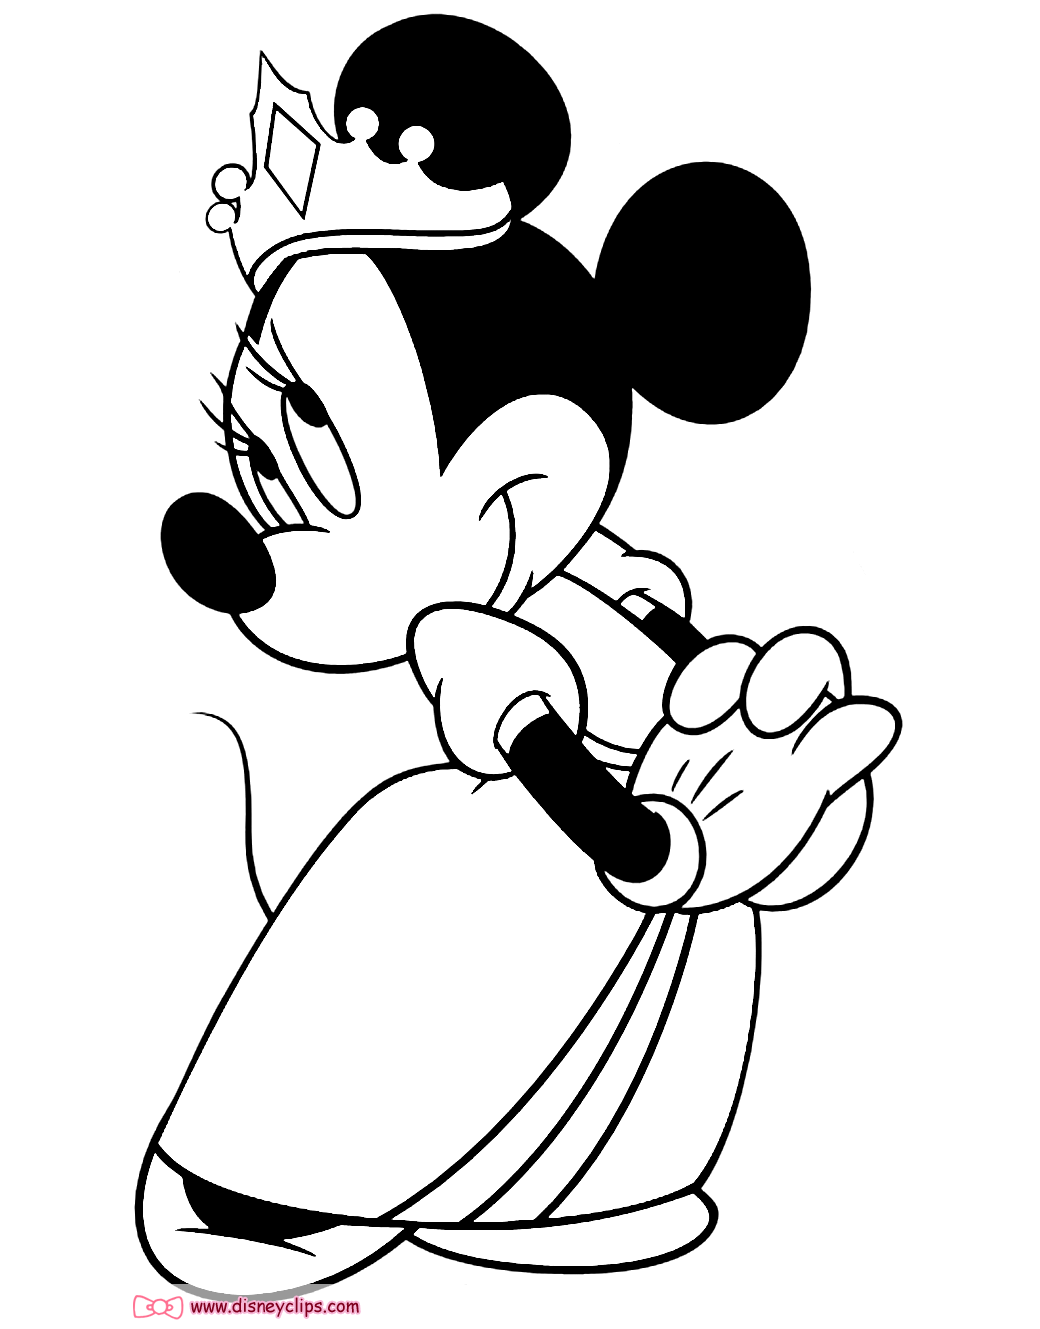 Minnie Mouse In Costume Coloring Pages | Disneyclips.com